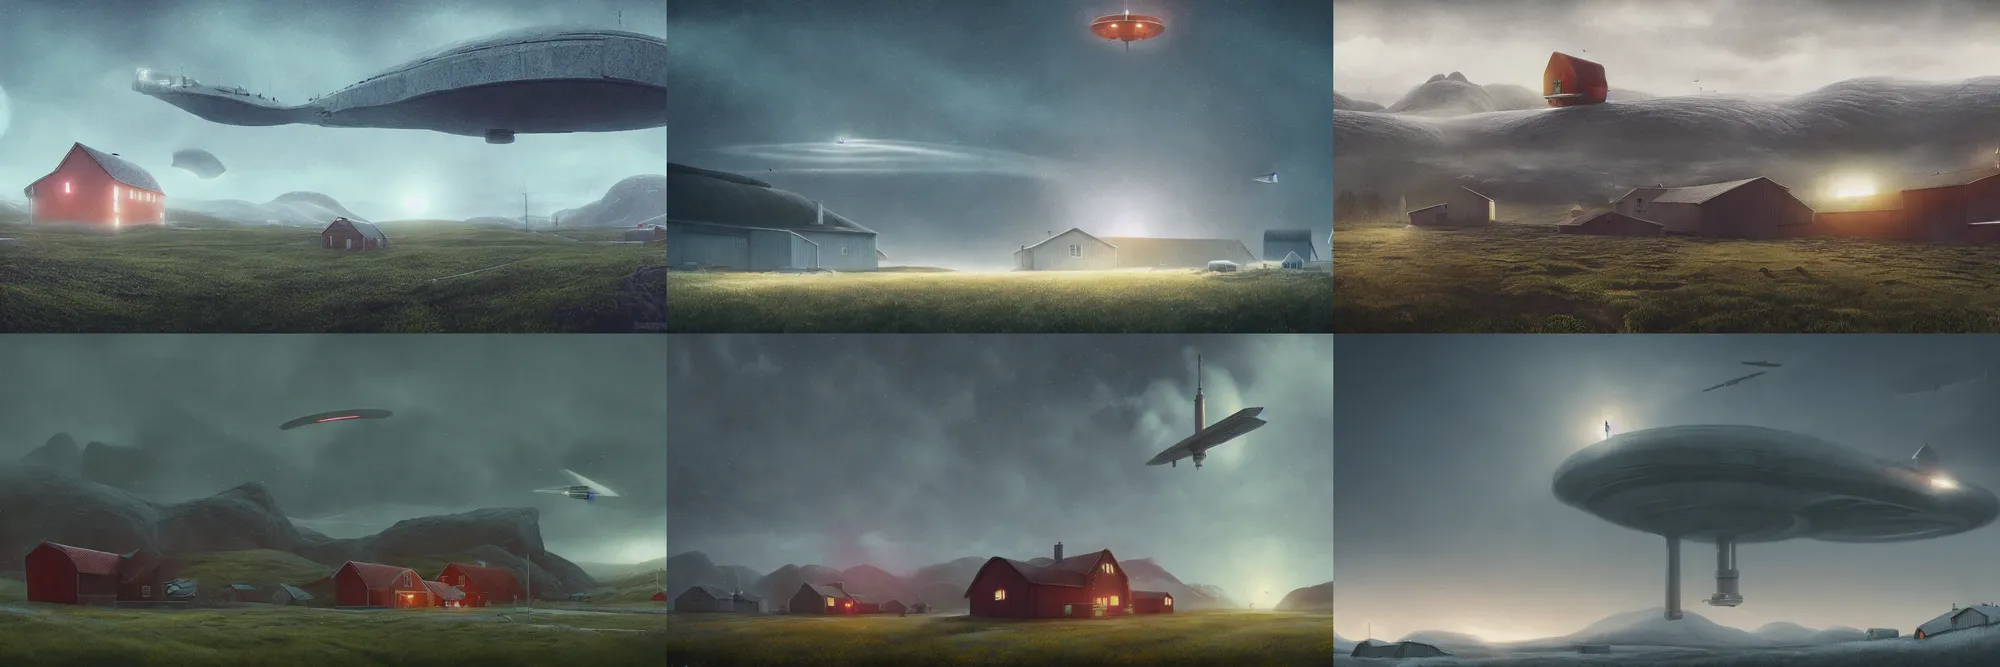 Prompt: In the north of Norway, a large spaceship flies far above a farm with a farmhouse and a stable, dreamy misty matte painting dystopian sci-fi digital art in the style of Simon Stalenhag, featured on Artstation